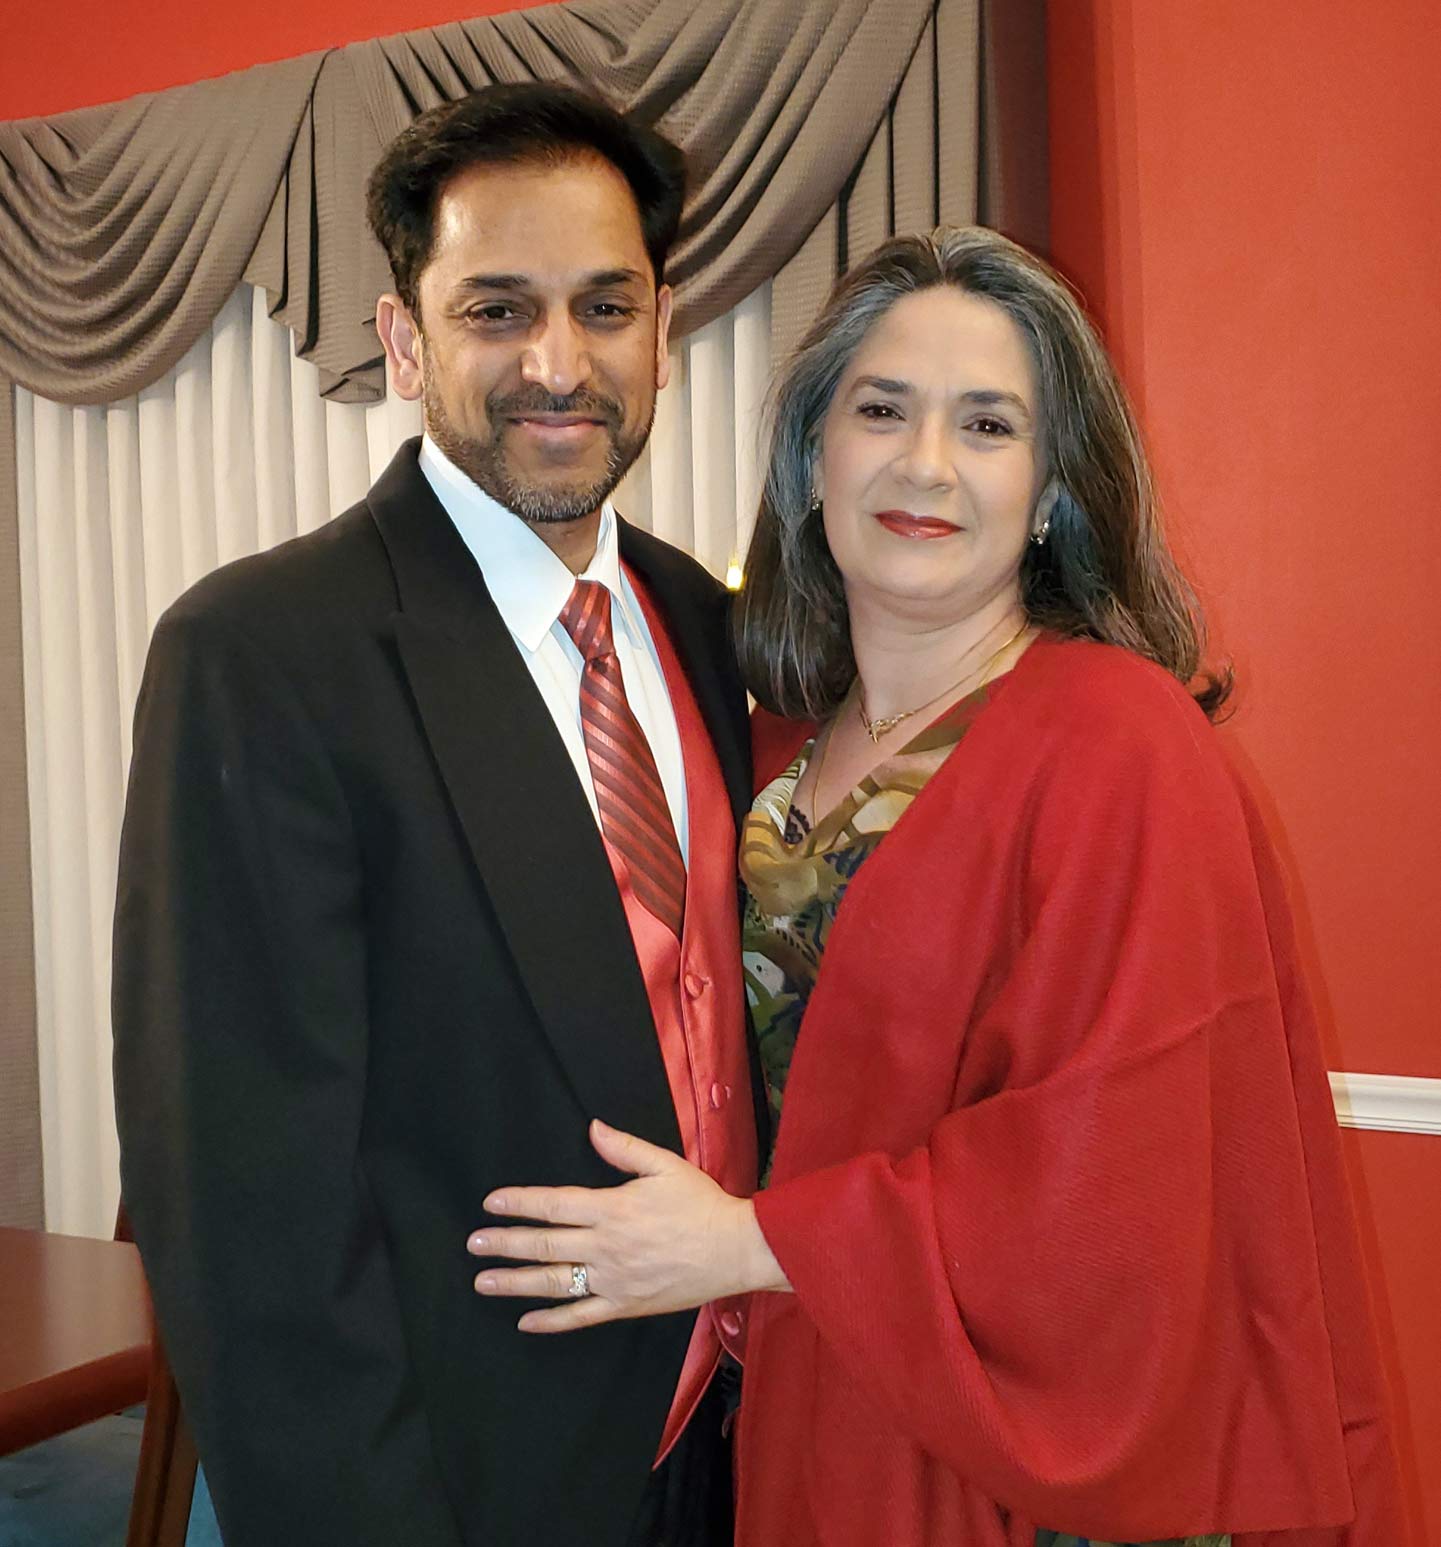 Man in suit and woman in red dress standing in red room